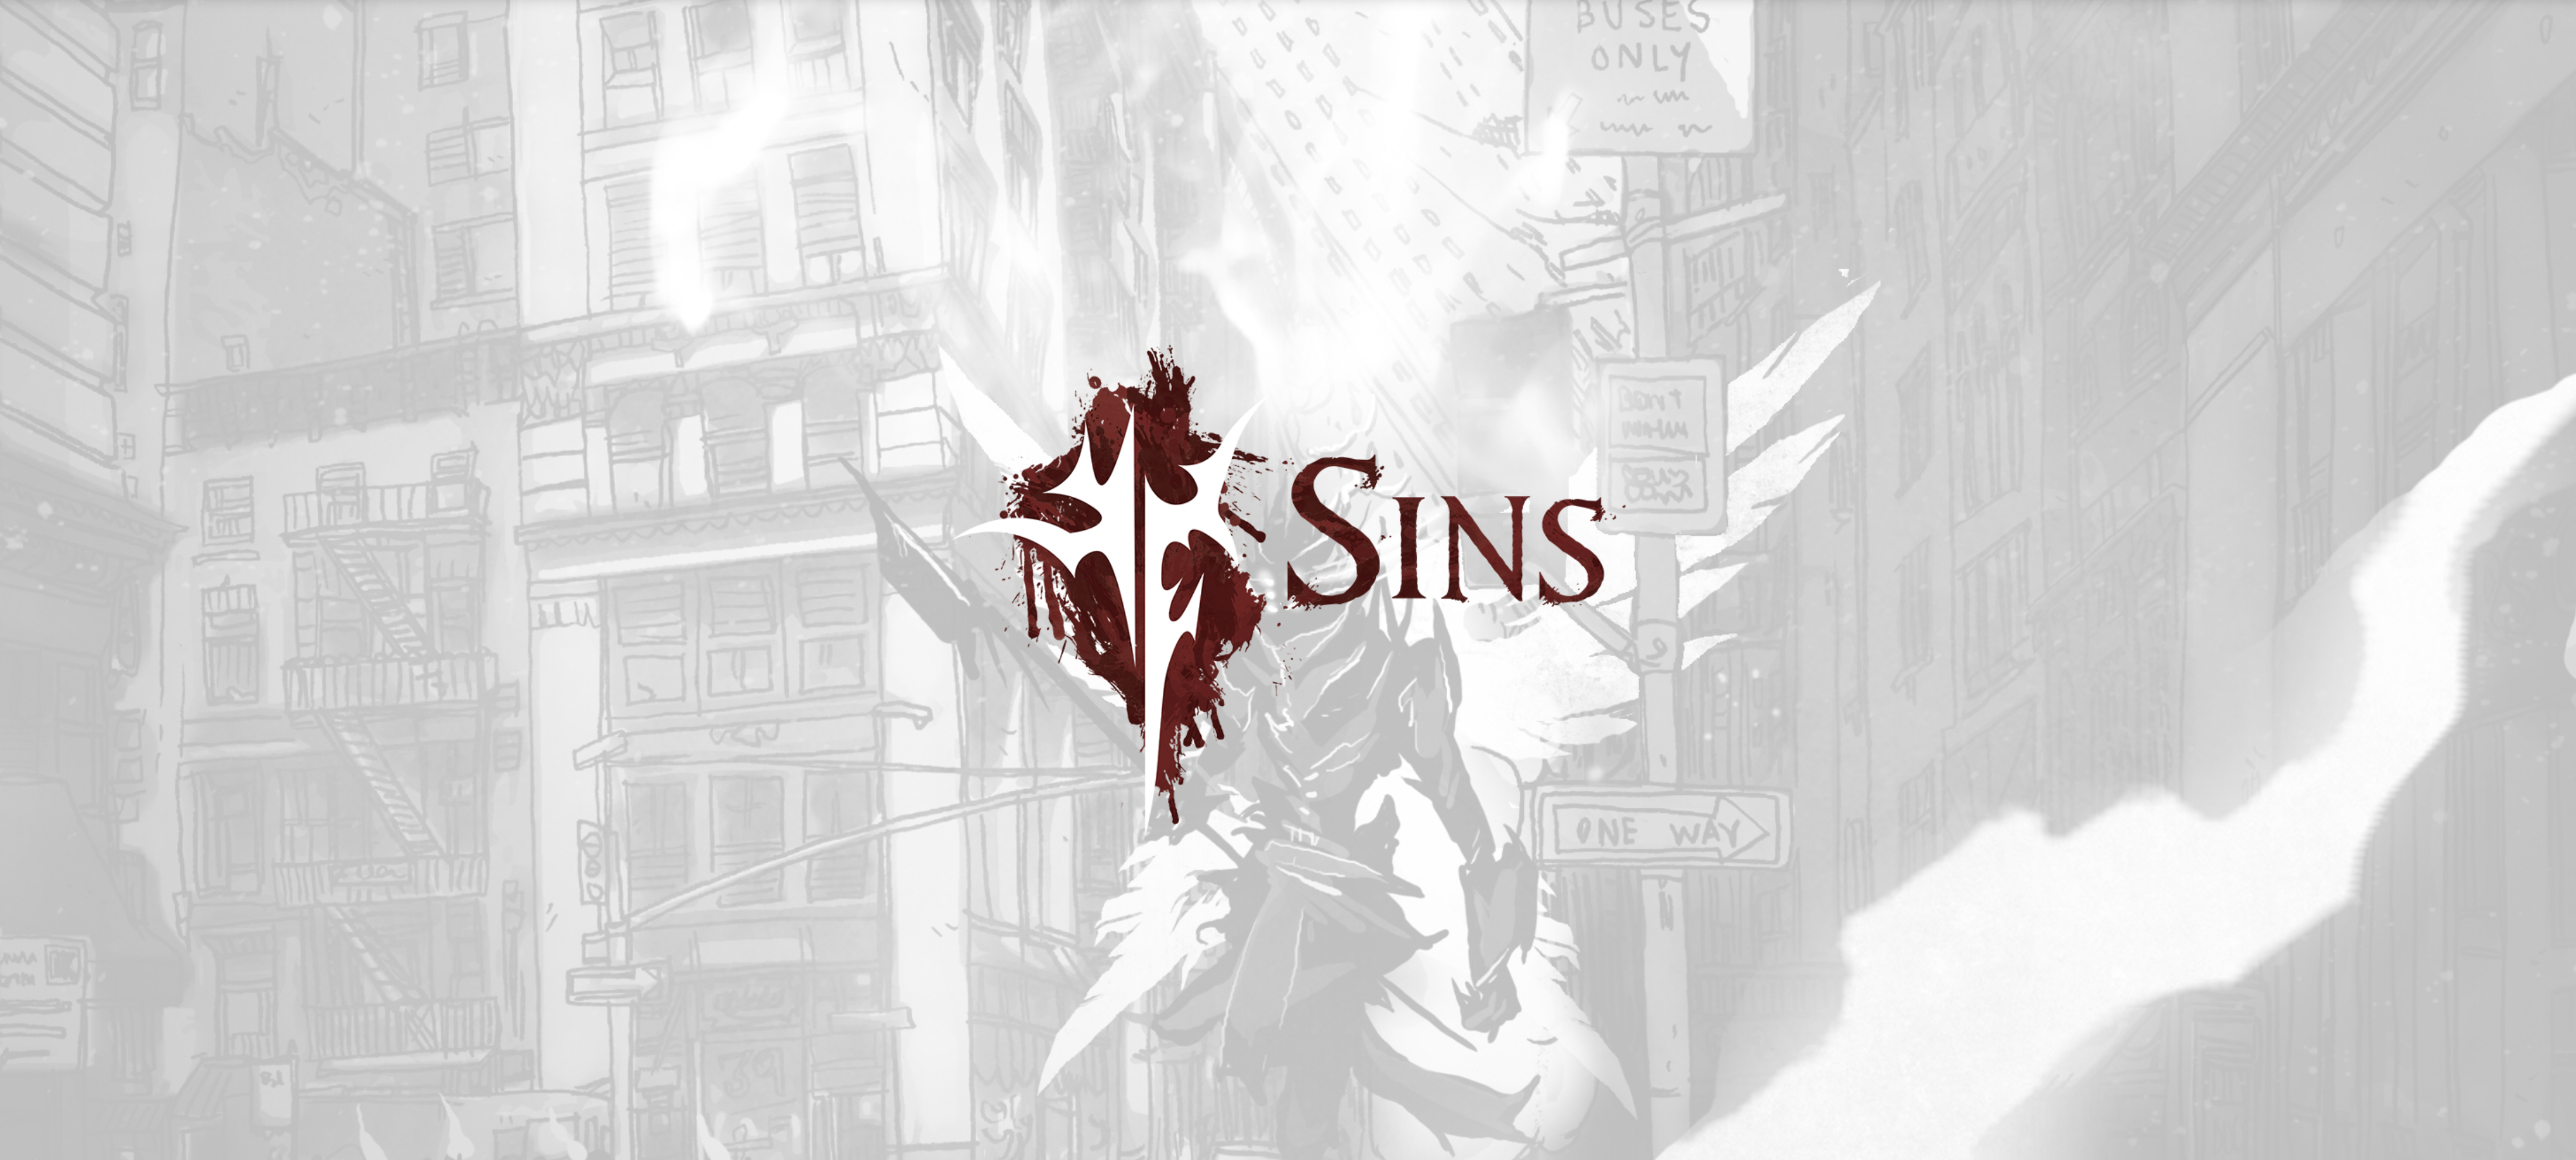 SINS – The Roleplaying Game joins Nightfall Games